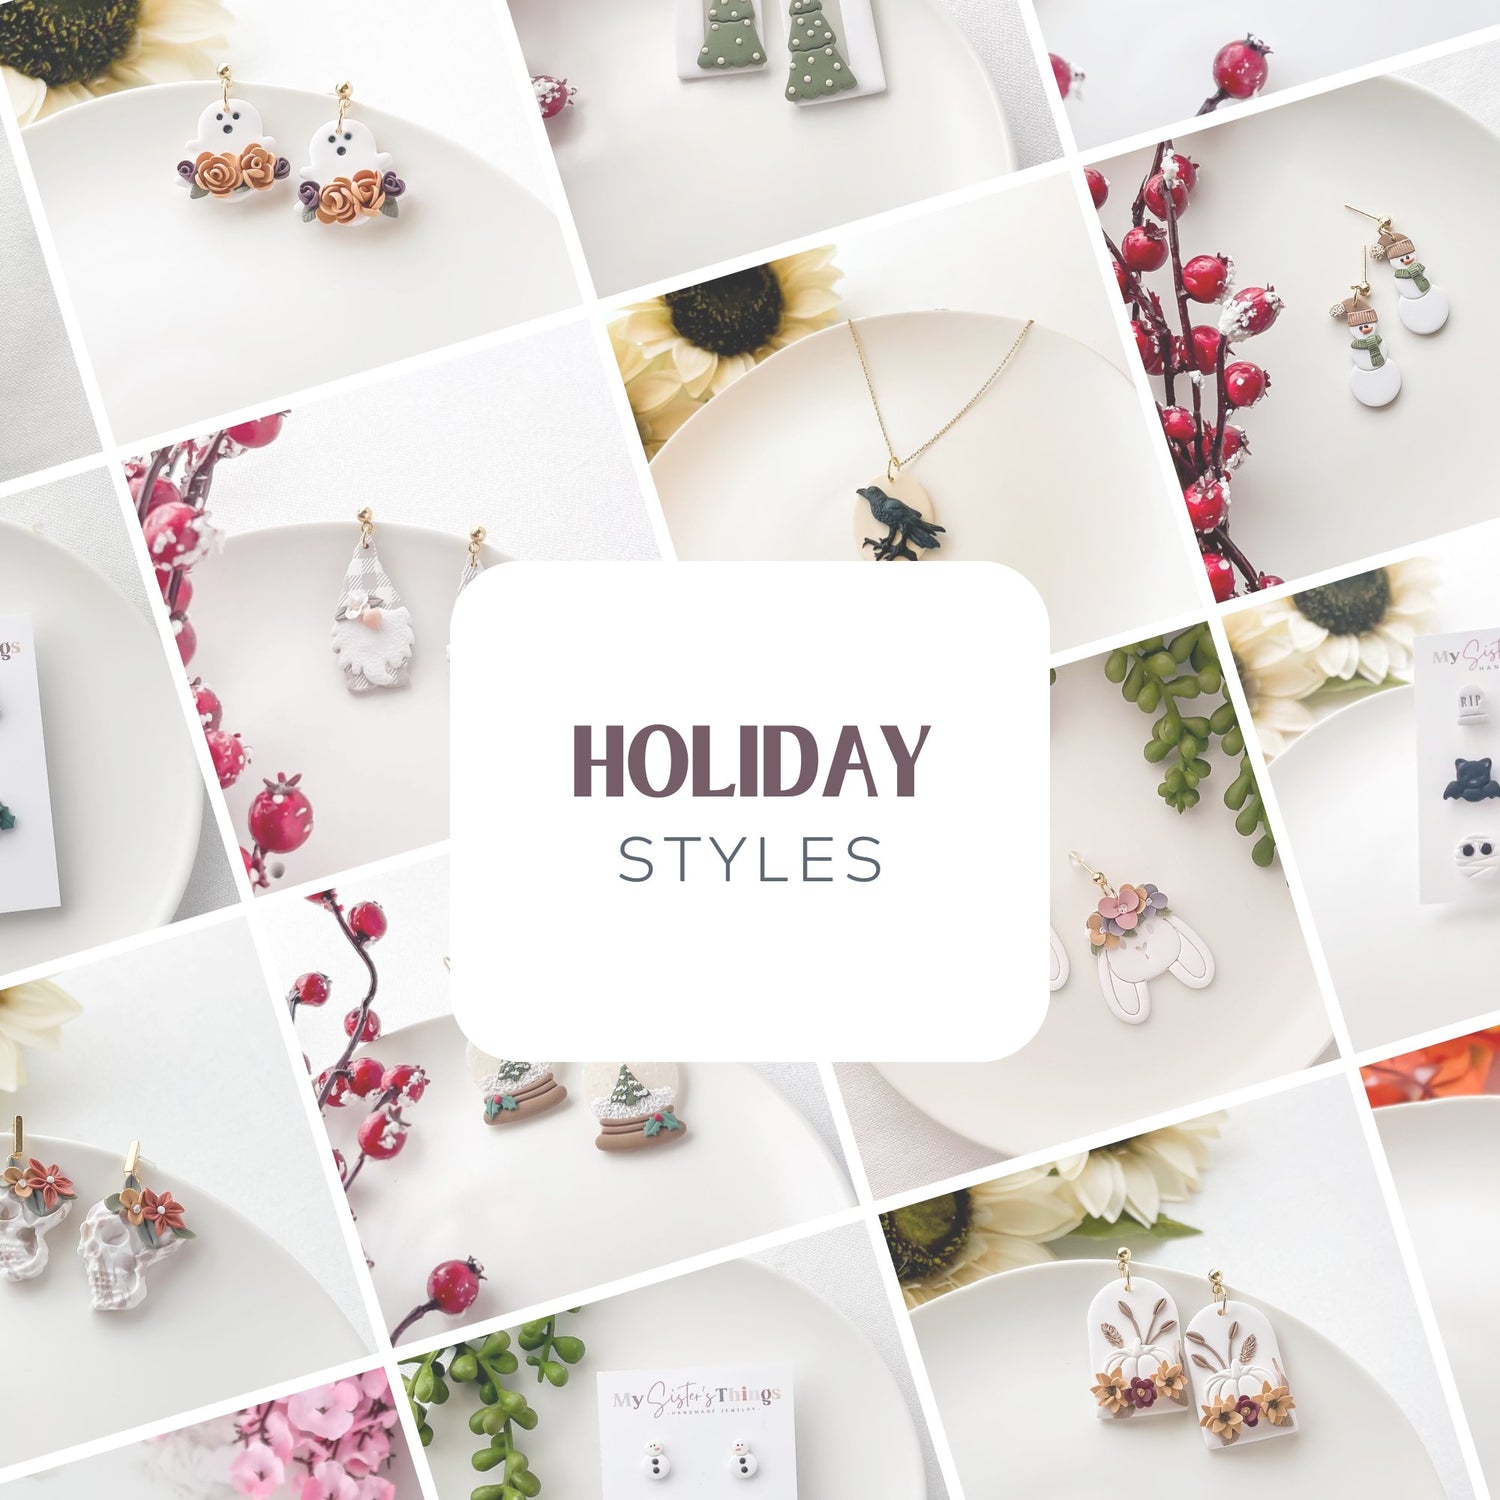 HOLIDAY STYLES